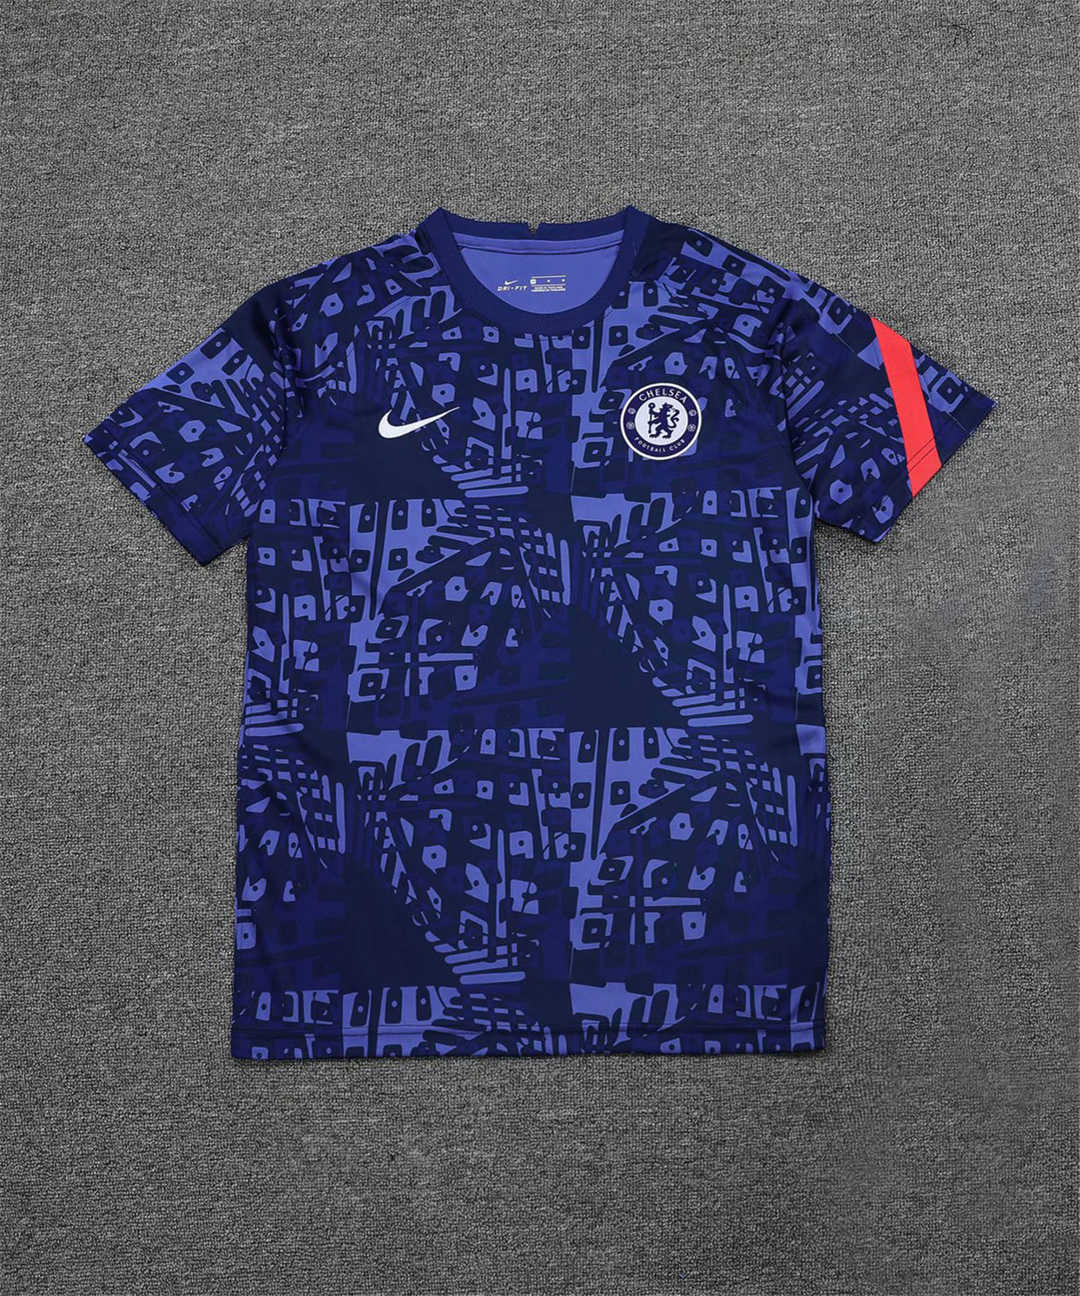 2020/21 Chelsea UCL Blue Mens Soccer Traning Jersey